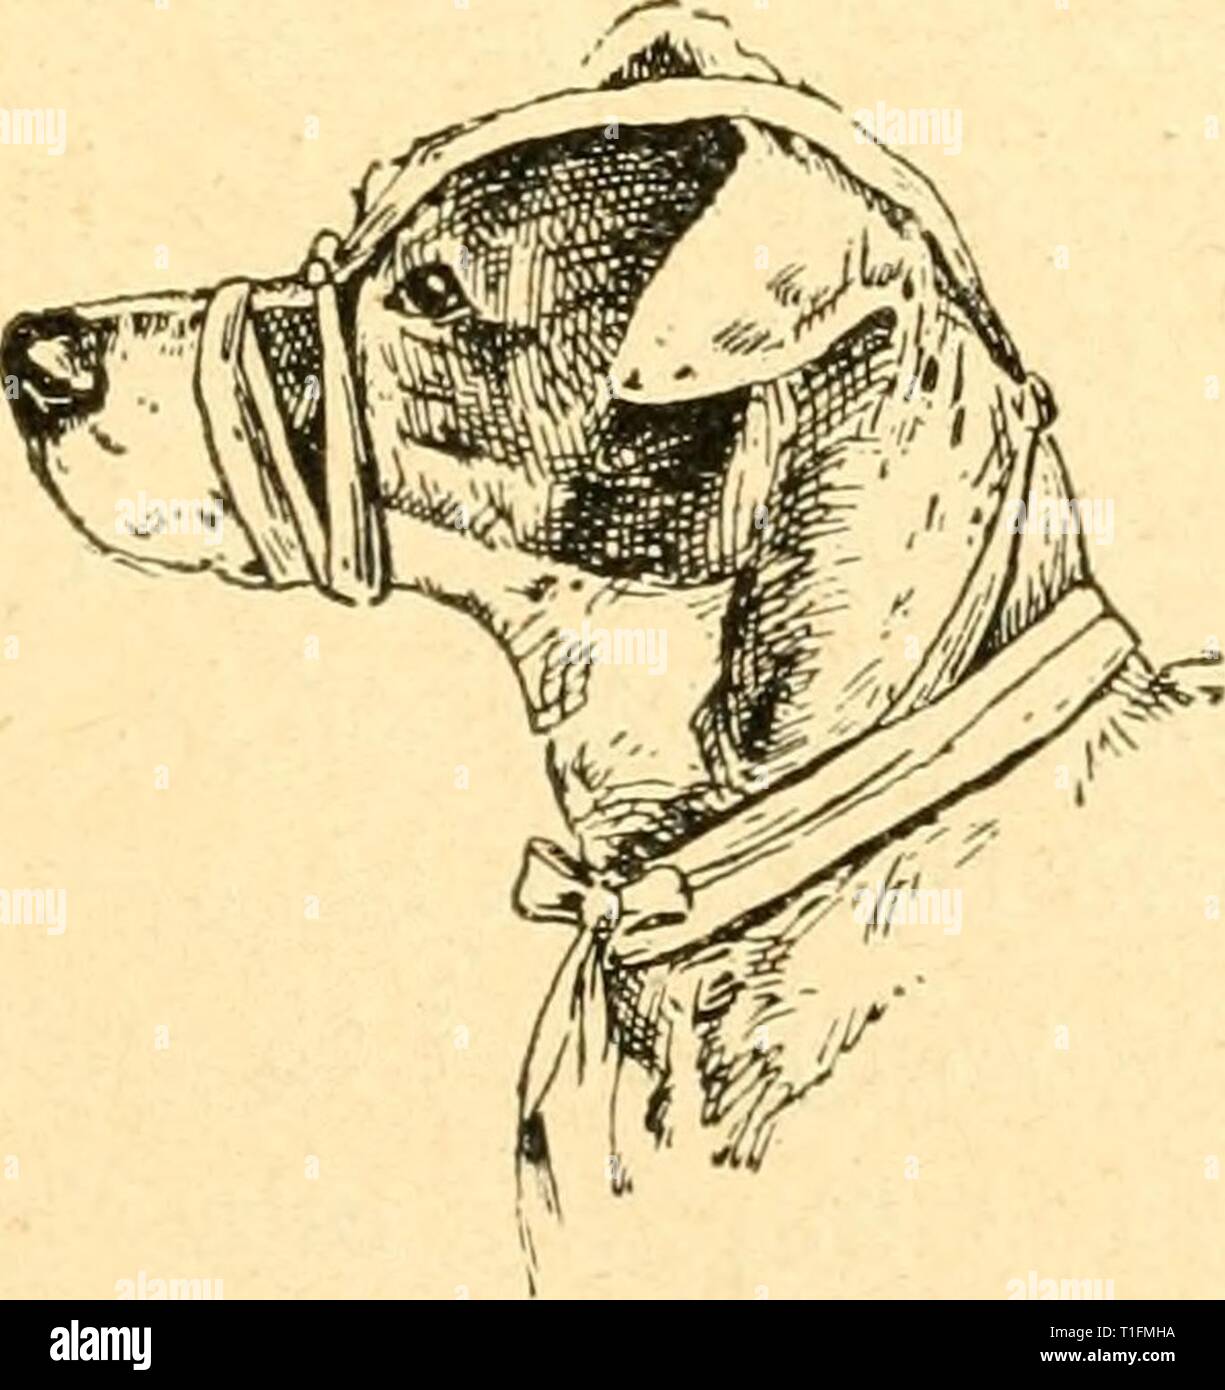 The dog Management in health, The dog. Management in health, treatment in disease  dogmanagementinh00john Year: 1900  IIIIIIIIIIIIIIIIIIIIIIIIIIIIIIIIIIIIIIIMIIIIIIIIIIIIIIIIIIIIIIIIIMMIIIIIIIIIIIIKIIIIIIXKIIIIl!, THE NORMAL TEMPERATURE — PULSE — RESPIRATION. TEMPERATURE. {Per Rectum.') Ranges from 100 to 102°. PULSE. {Taken at the Inside of Thigh.) Pulse at Birth, ranges from 130 to 160 beats per minute. Pulse during first three months ranges from 120 to 140 beats per minute. Pulse from three months to one year, ranges from 90 to 110 beats per minute. Pulse after one year of age, ranges from  Stock Photo